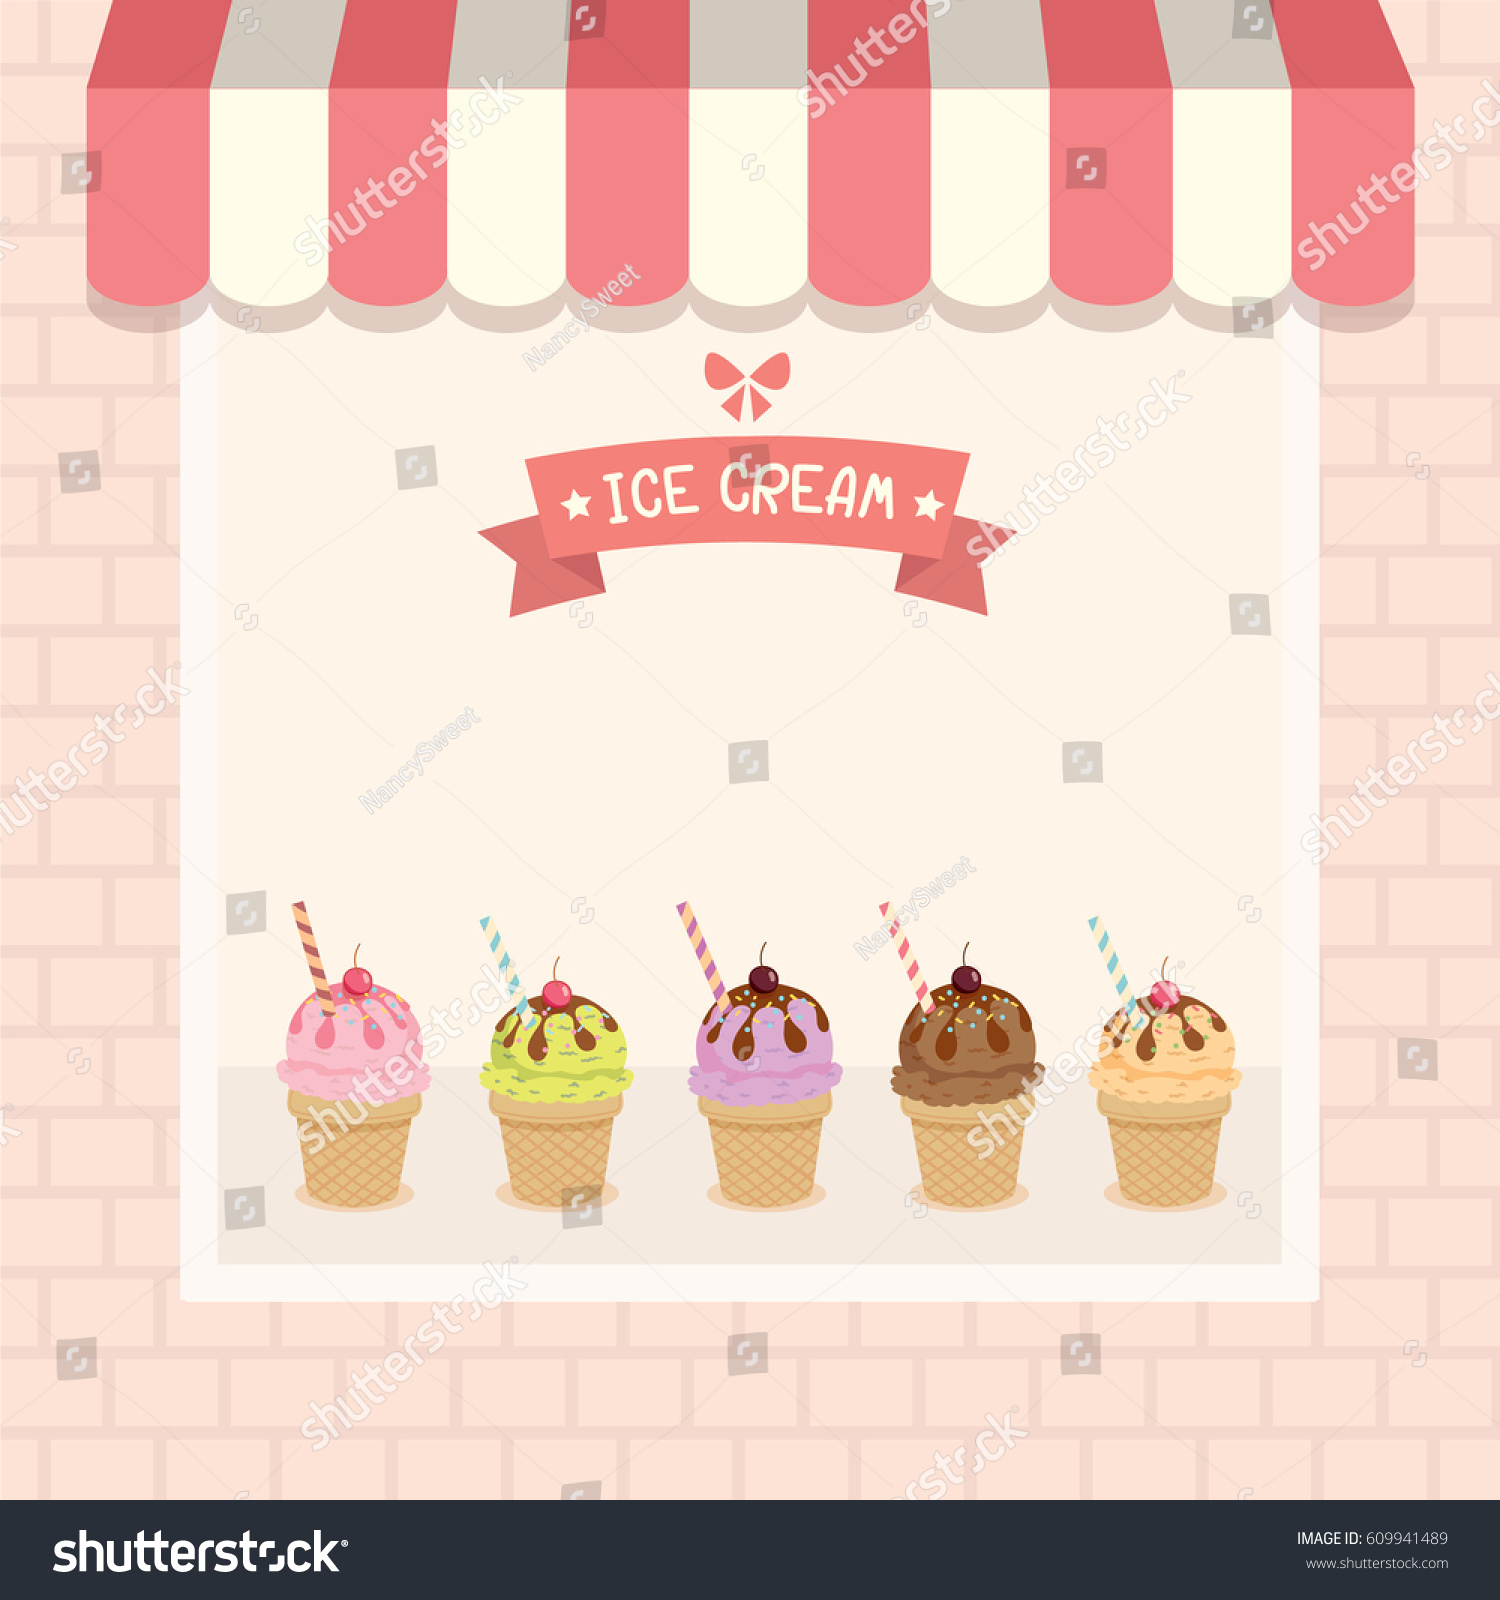 SVG of Ice-cream cafe shop showcase decorated with awning and brick wall in pink and  pastel background colors.Illustration vector. svg